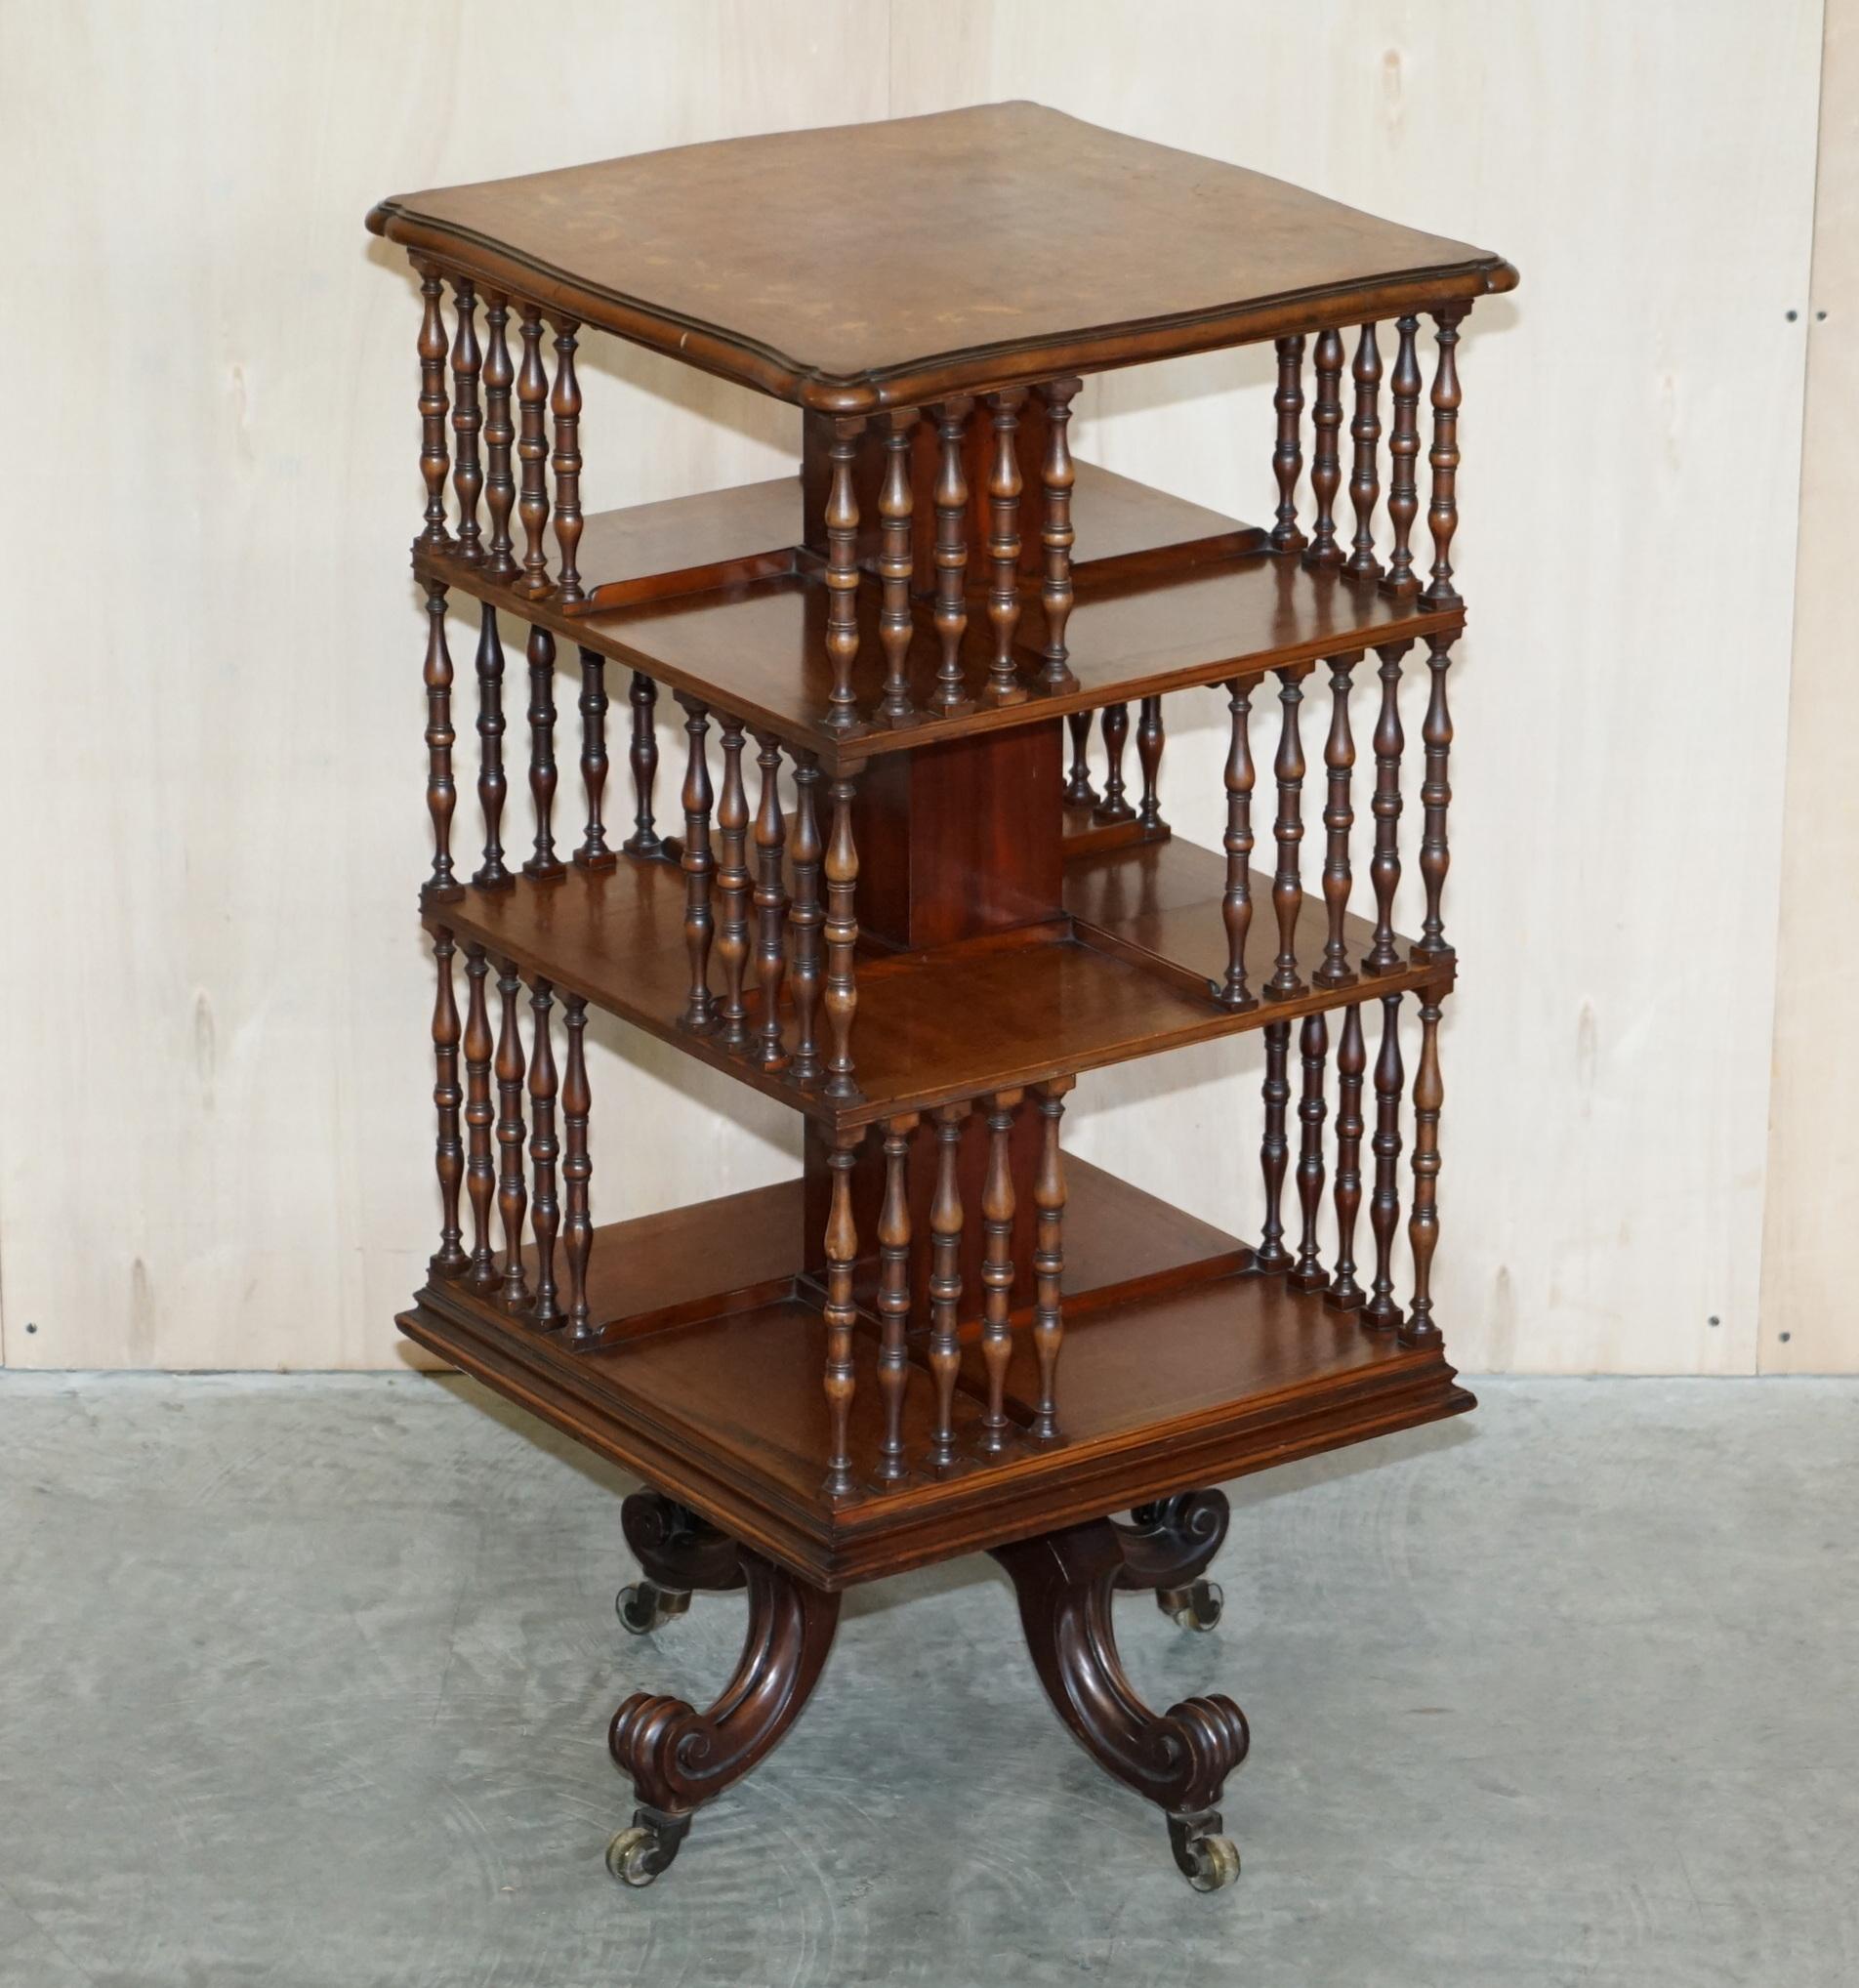 We are delighted to offer for sale this exhibition quality English mahogany circa 1880 revolving bookcase table with nicely carved cabriolet legs, three levels and turned spindles 

A good looking and well made piece, this is the first one I have